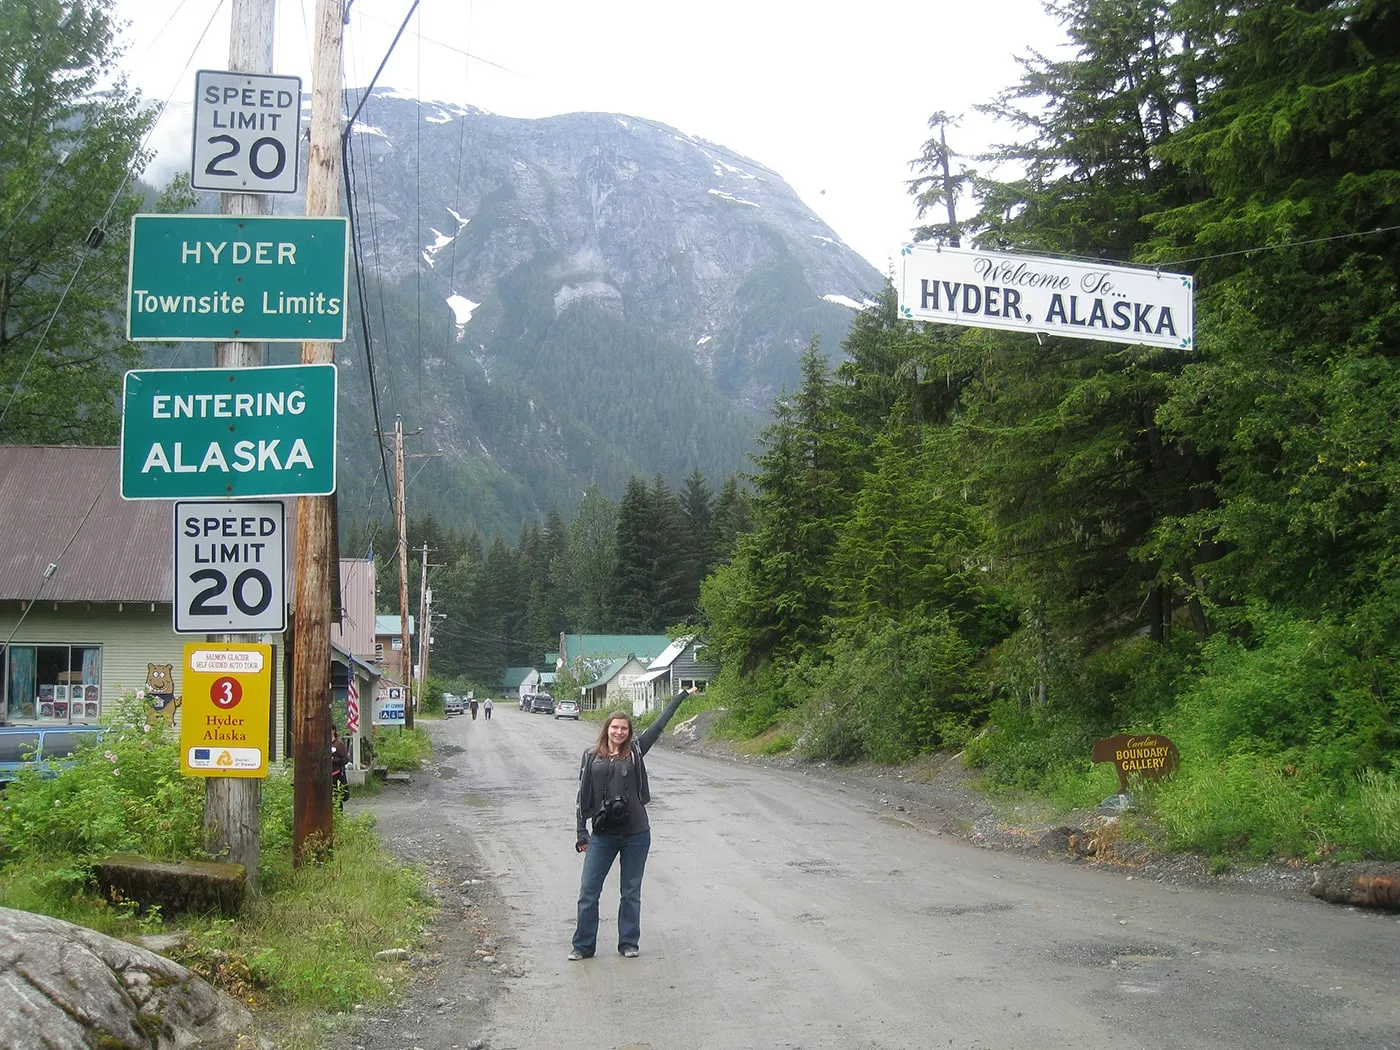 Val in front of the Welcome to Hyder, Alaska sign.